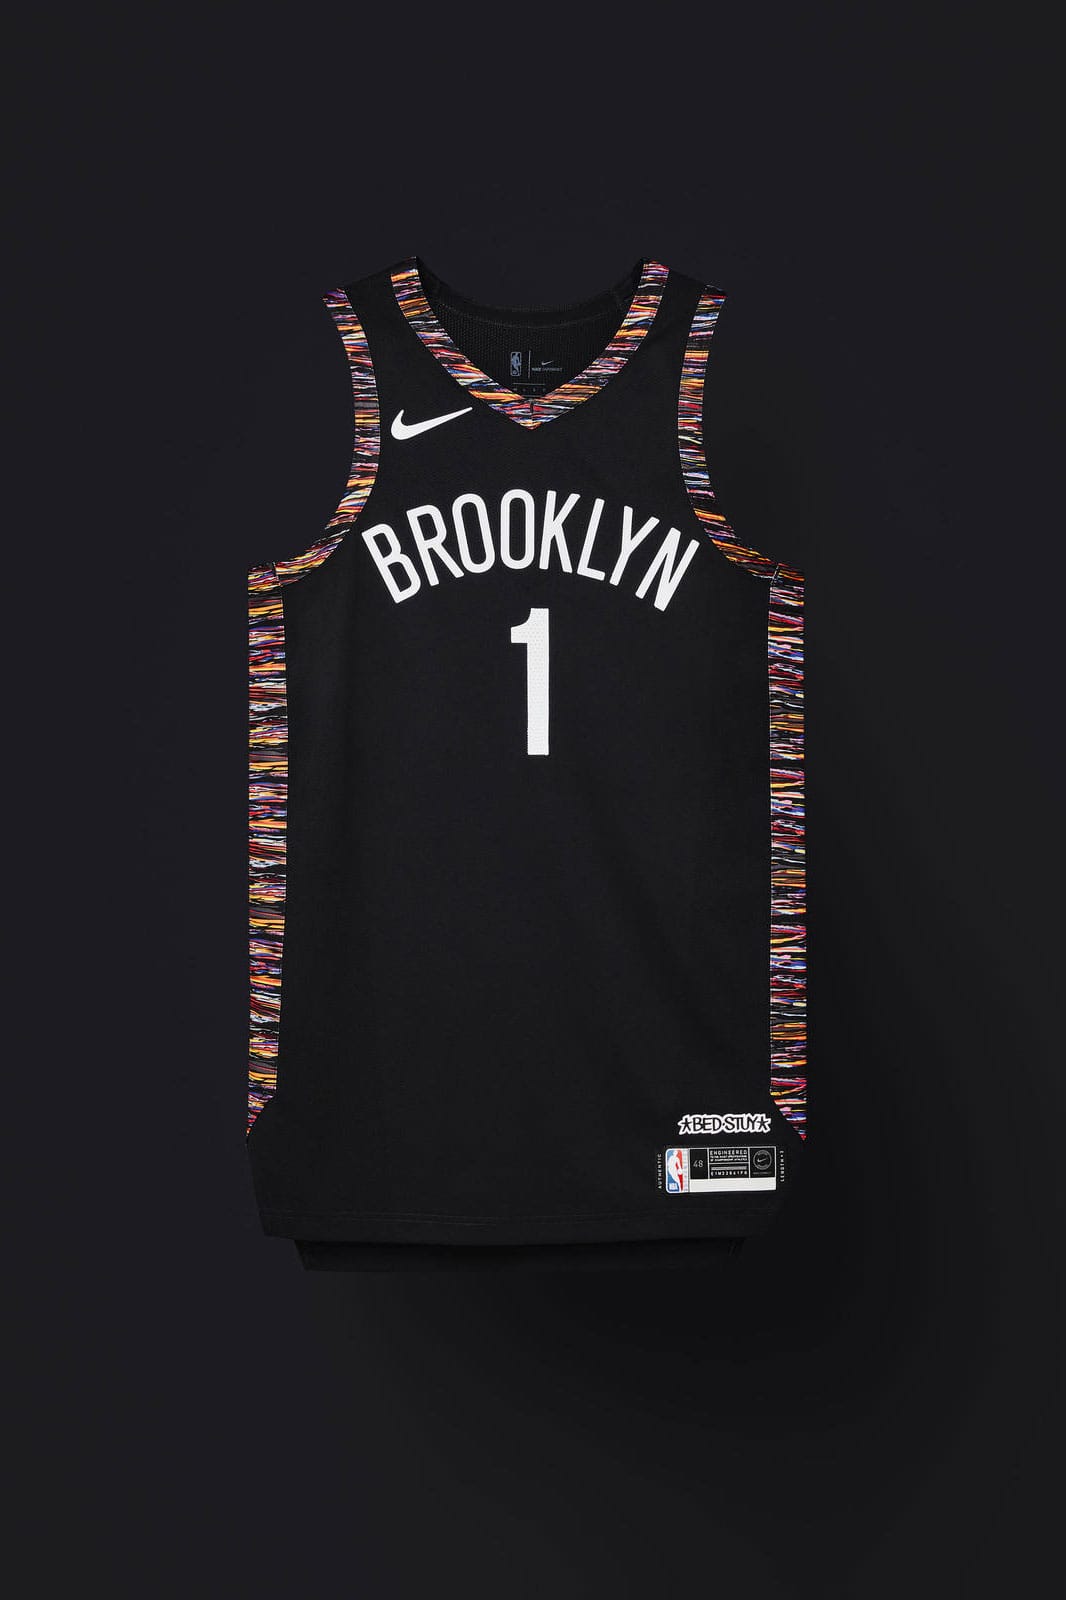 wizards city jersey 2019